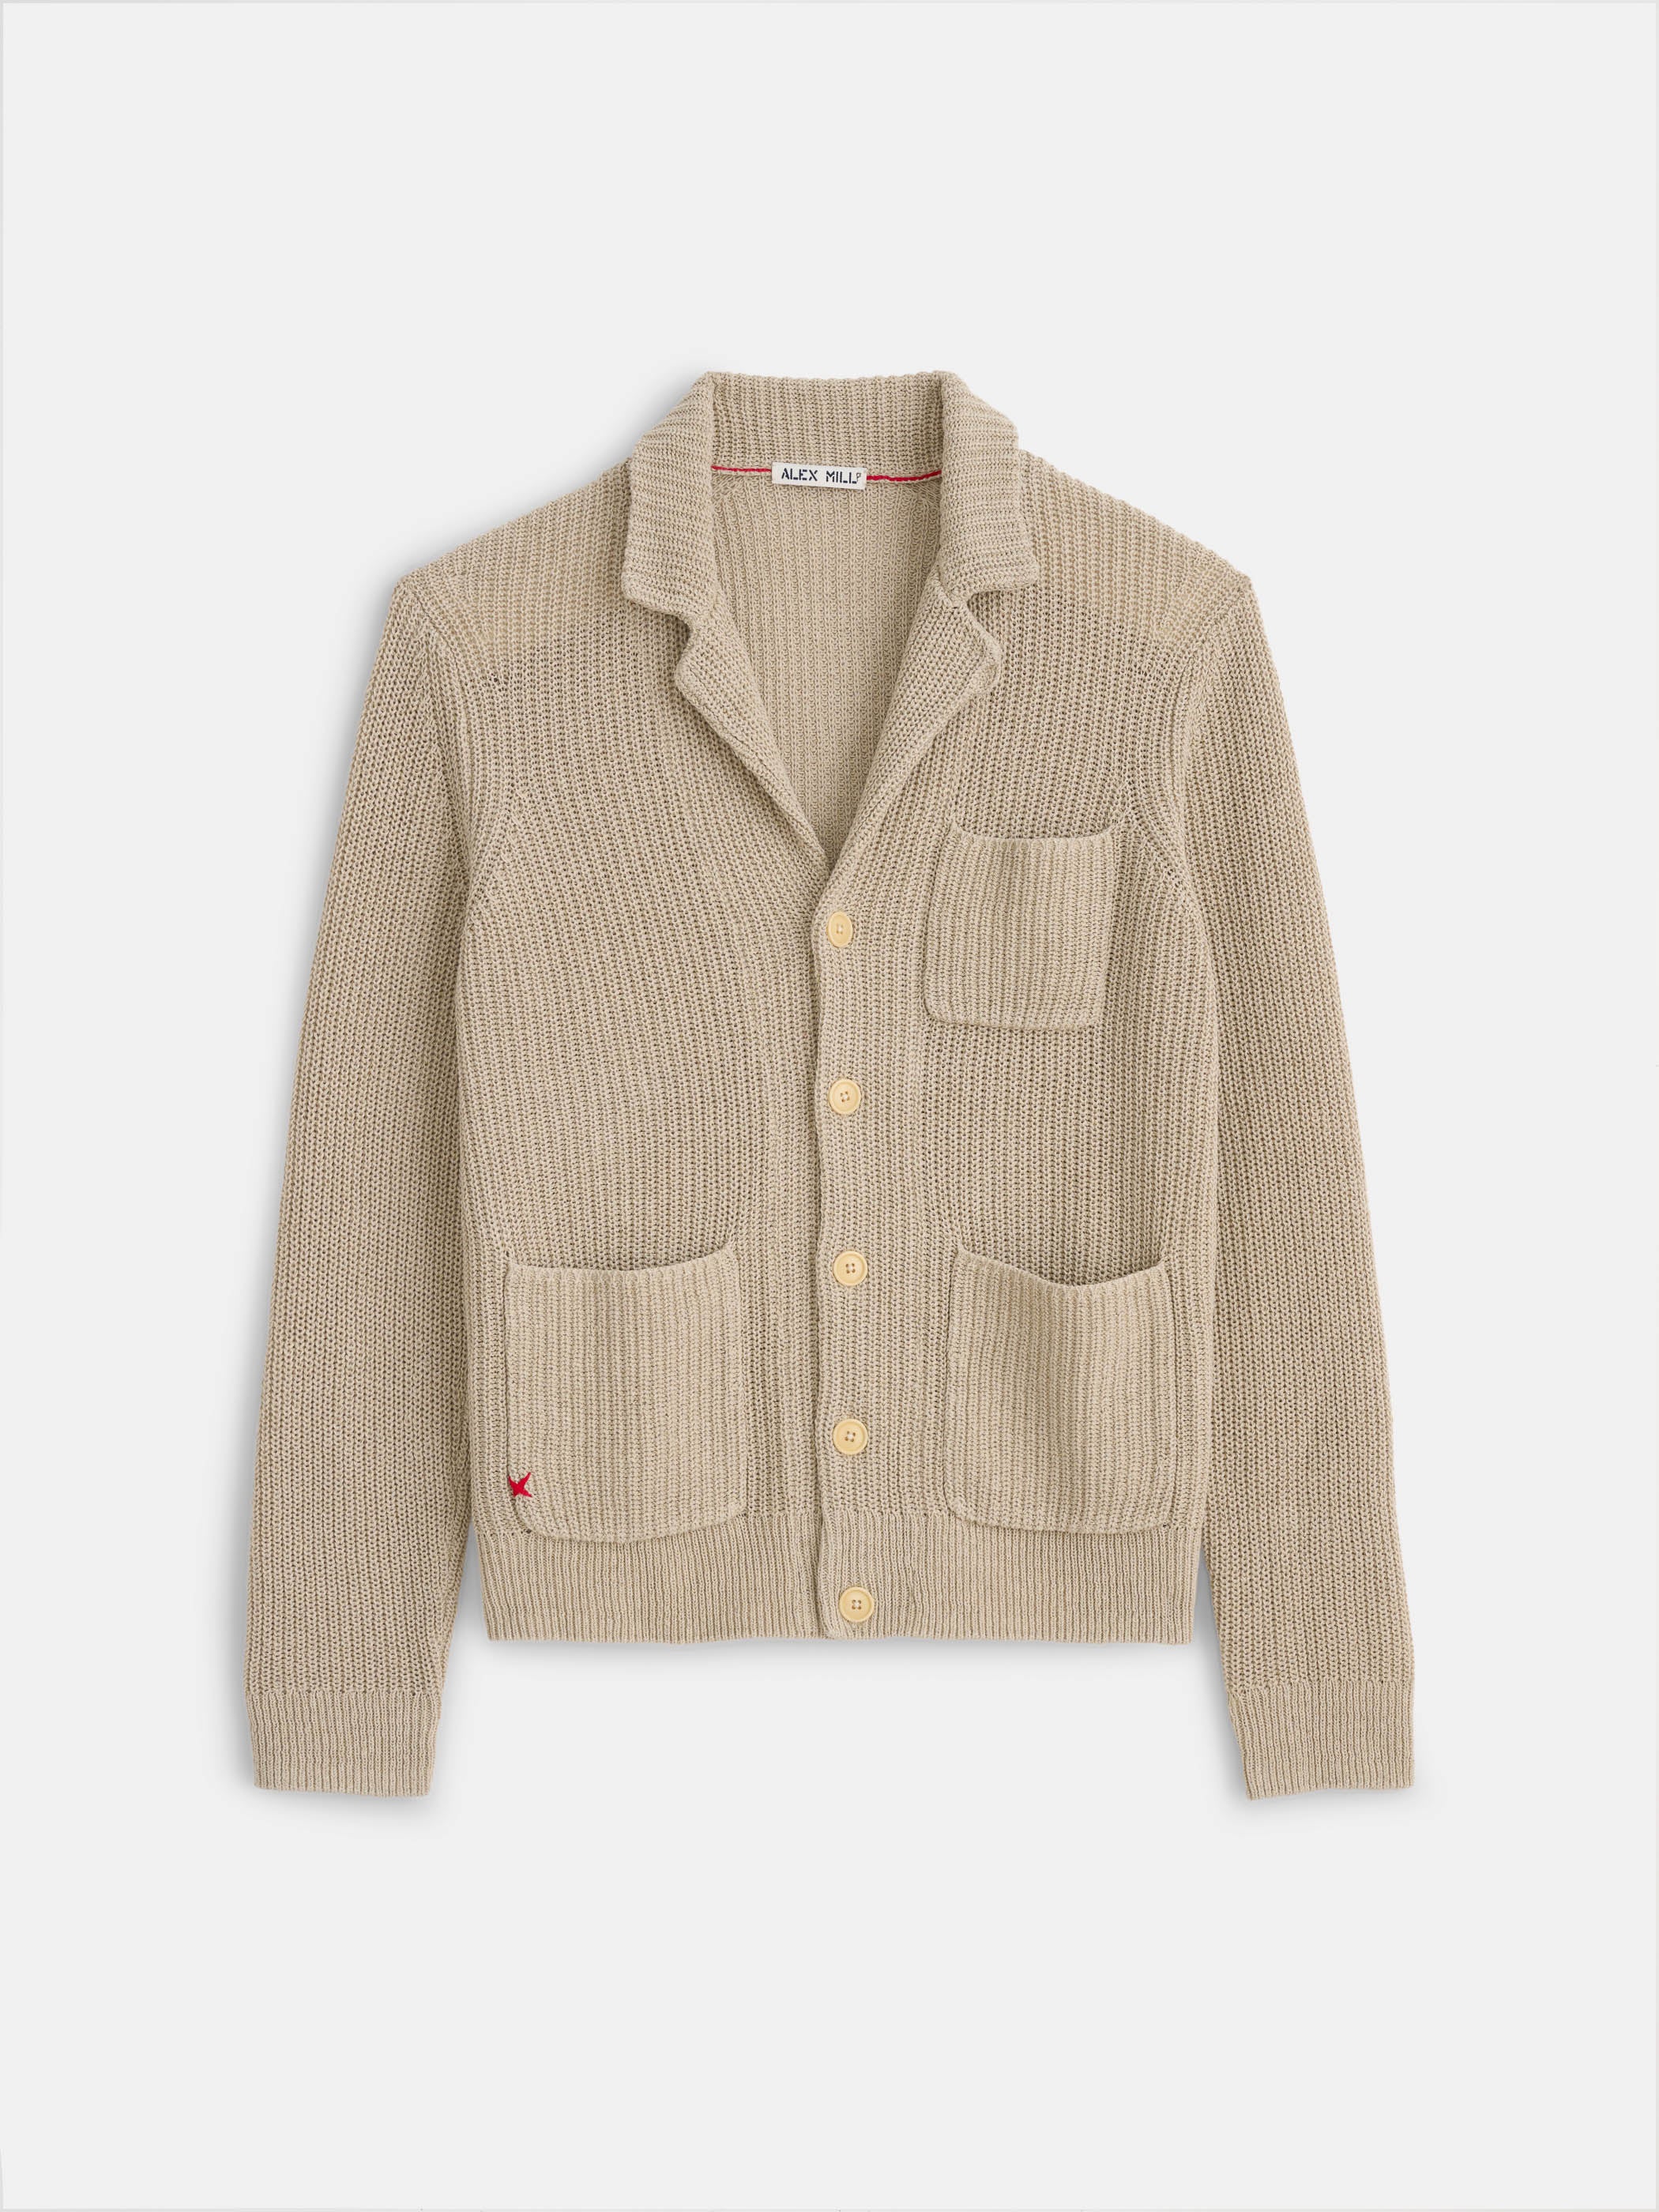 Ribbed Blazer Cardigan In Linen Cotton Flax